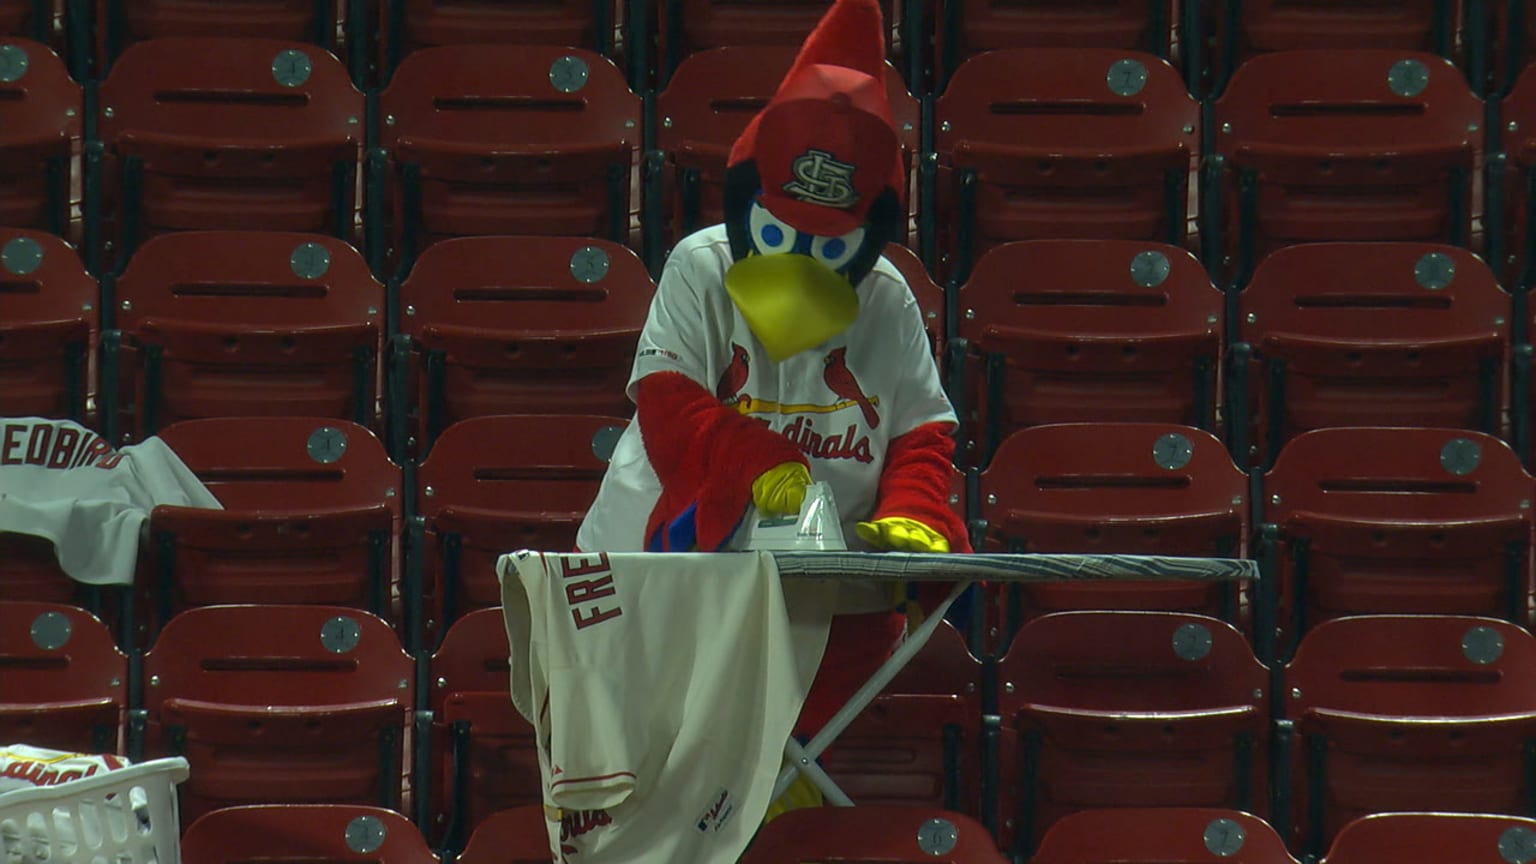 Cardinals, Fredbird does his laundry in Big Mac Land